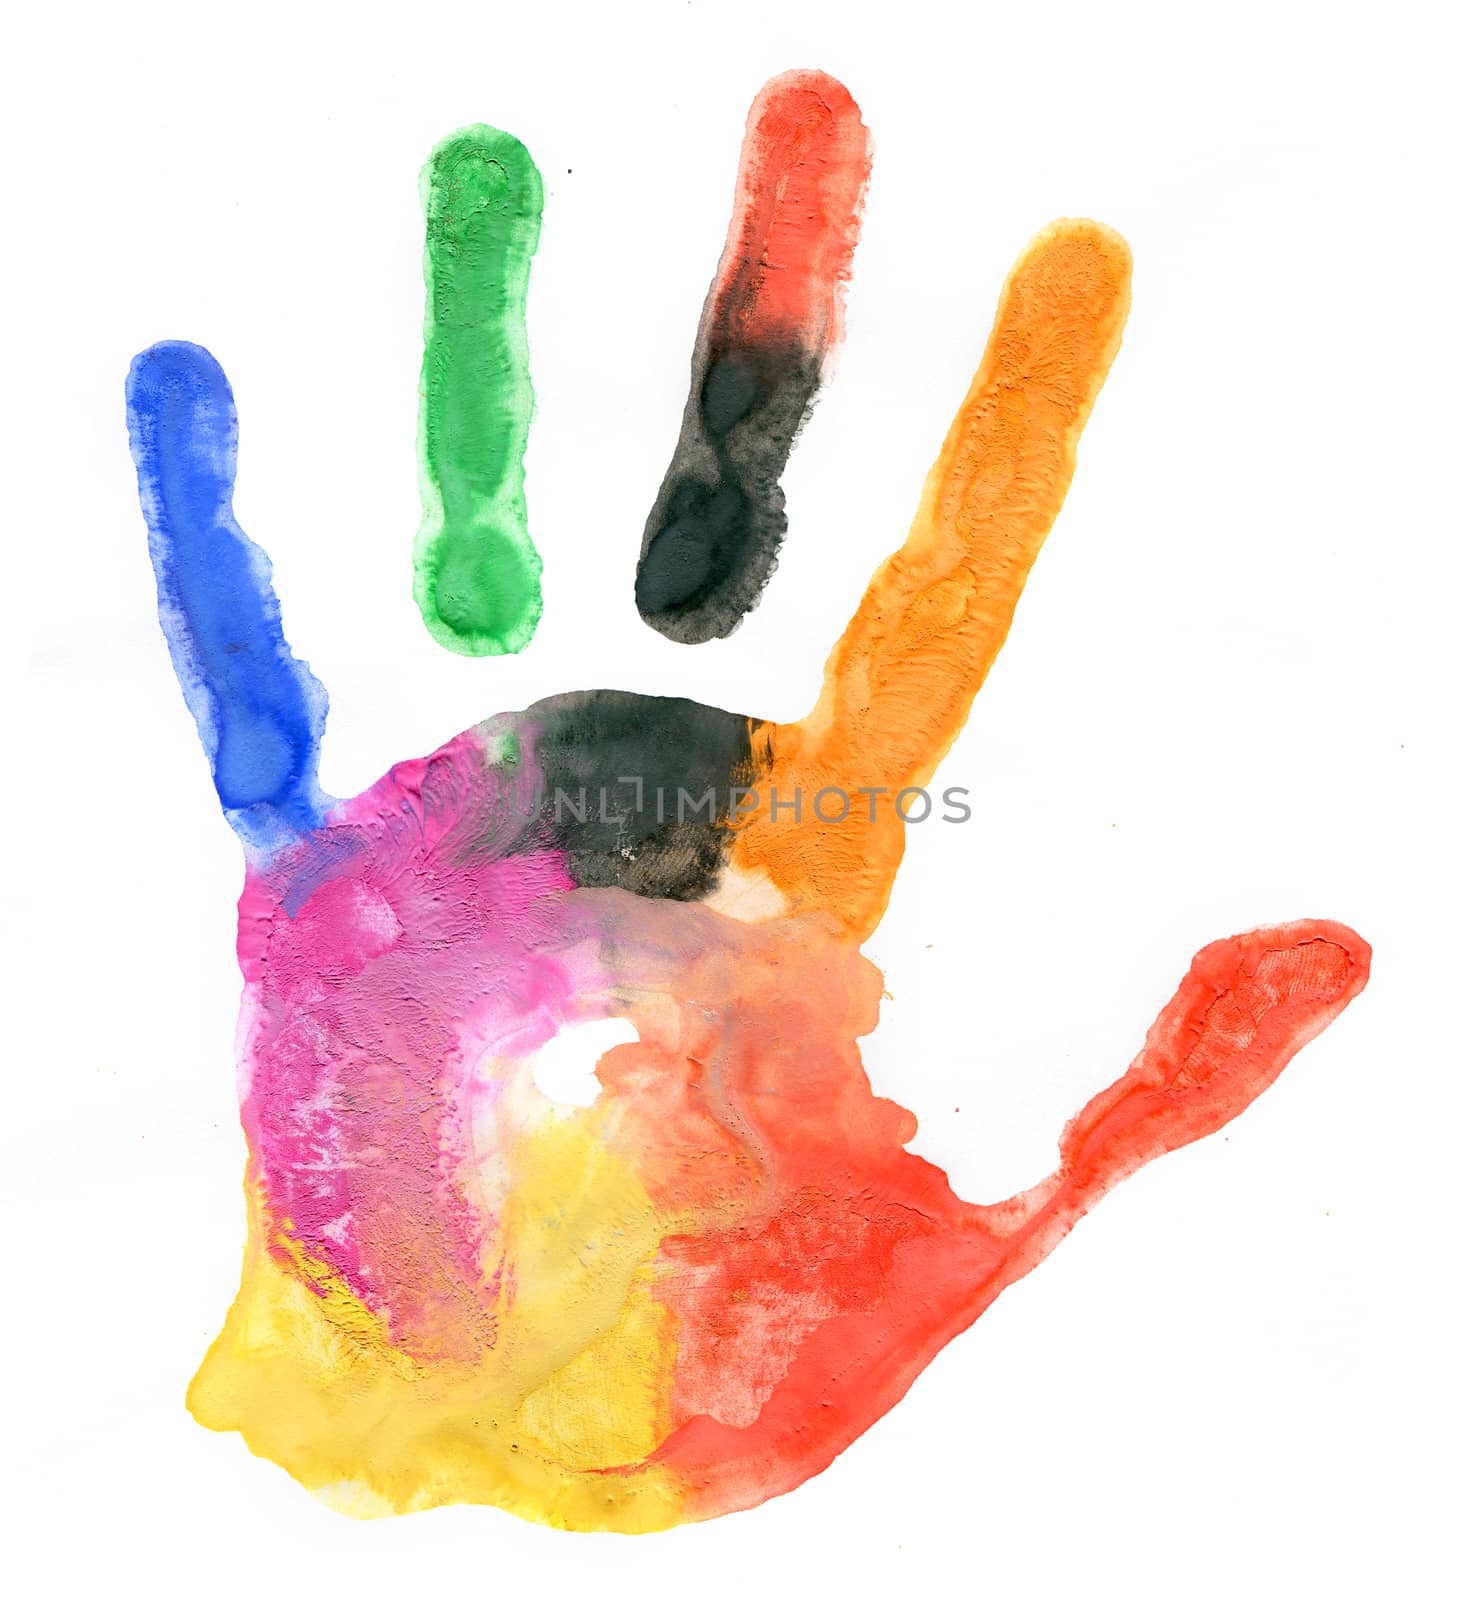 Close up of colored hand print on white by vlad_star